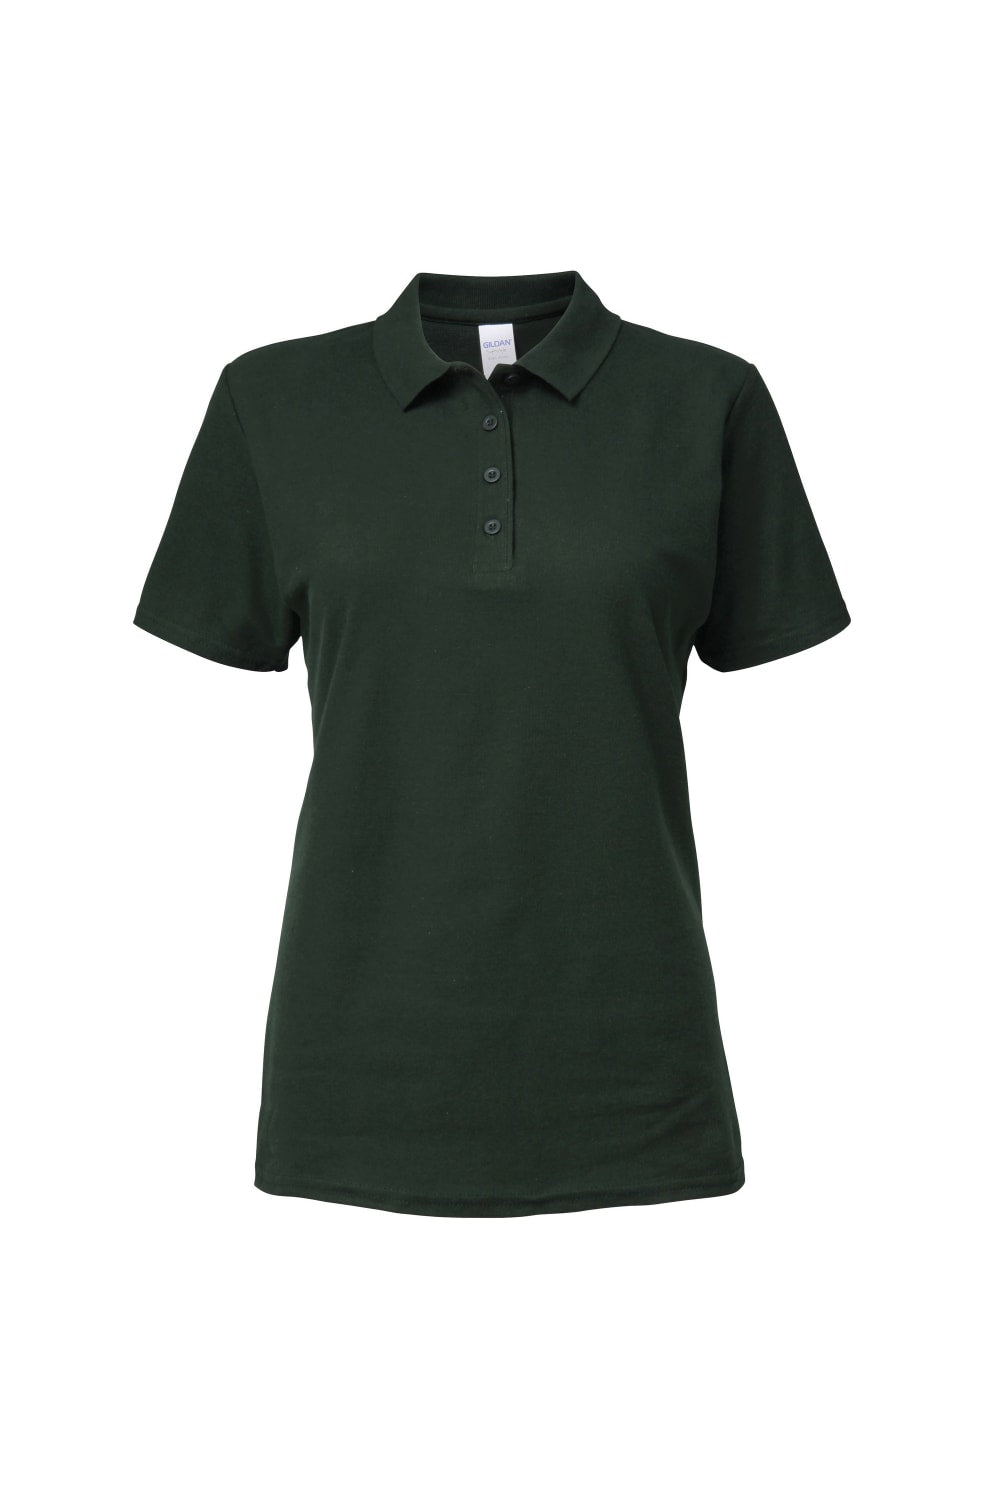 Gildan Softstyle Womens/Ladies Short Sleeve Double Pique Polo Shirt (Forest Green)